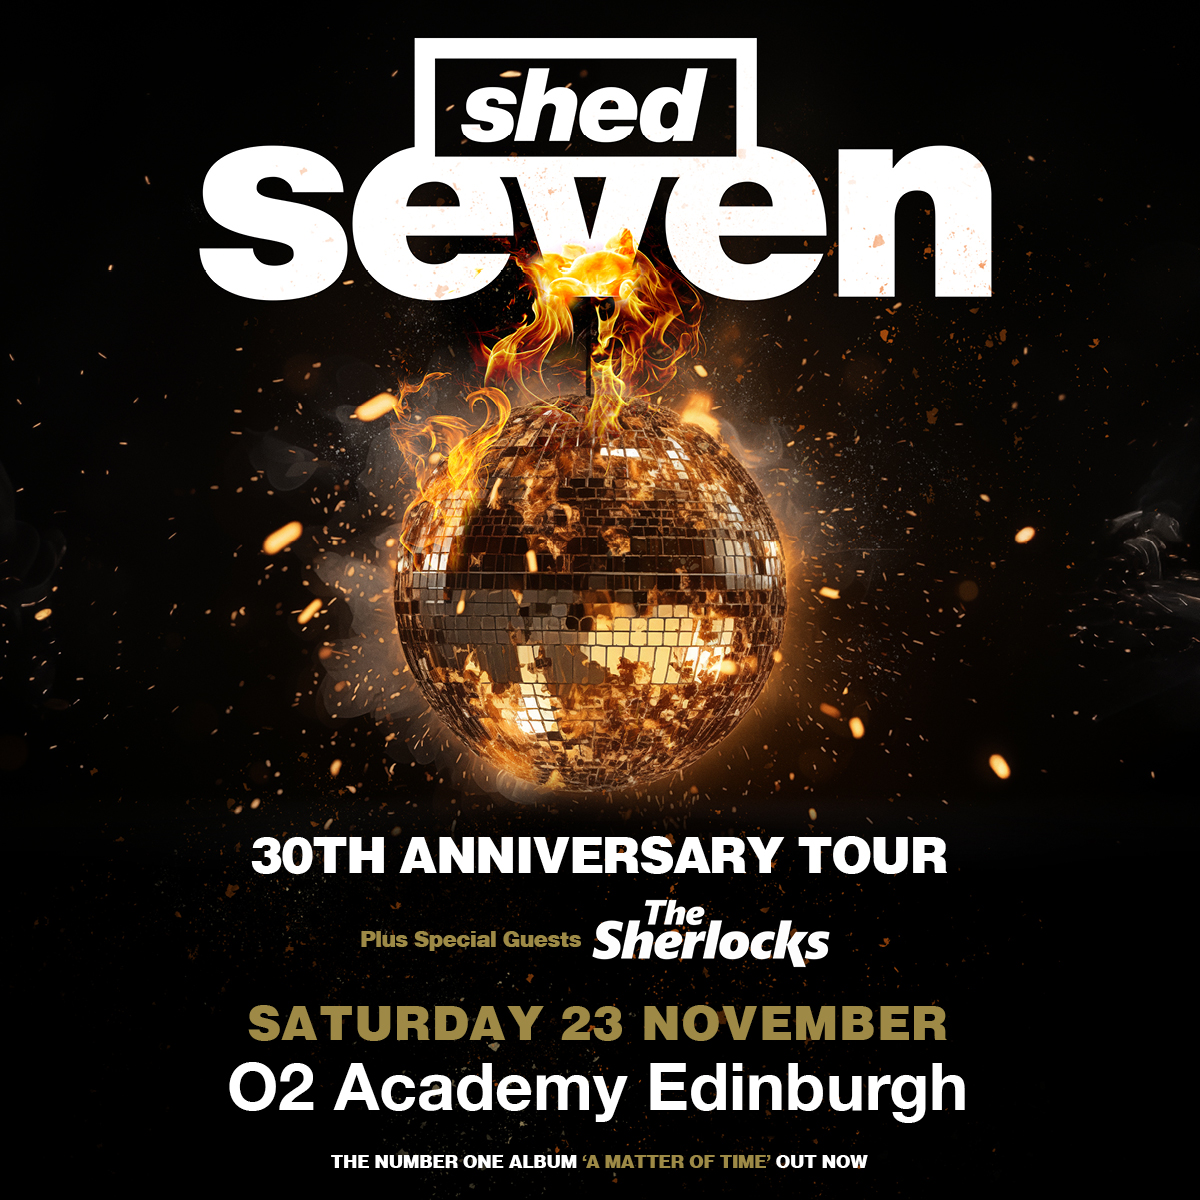 Delivering a career-spanning set as well as tracks from their acclaimed No.1 album 'A Matter of Time', @shedseven head here Sat 23 Nov as part of a very special 30th-anniversary tour. 🔊 🎟️ amg-venues.com/ClTh50RAeBp #O2AcademyEdinburgh